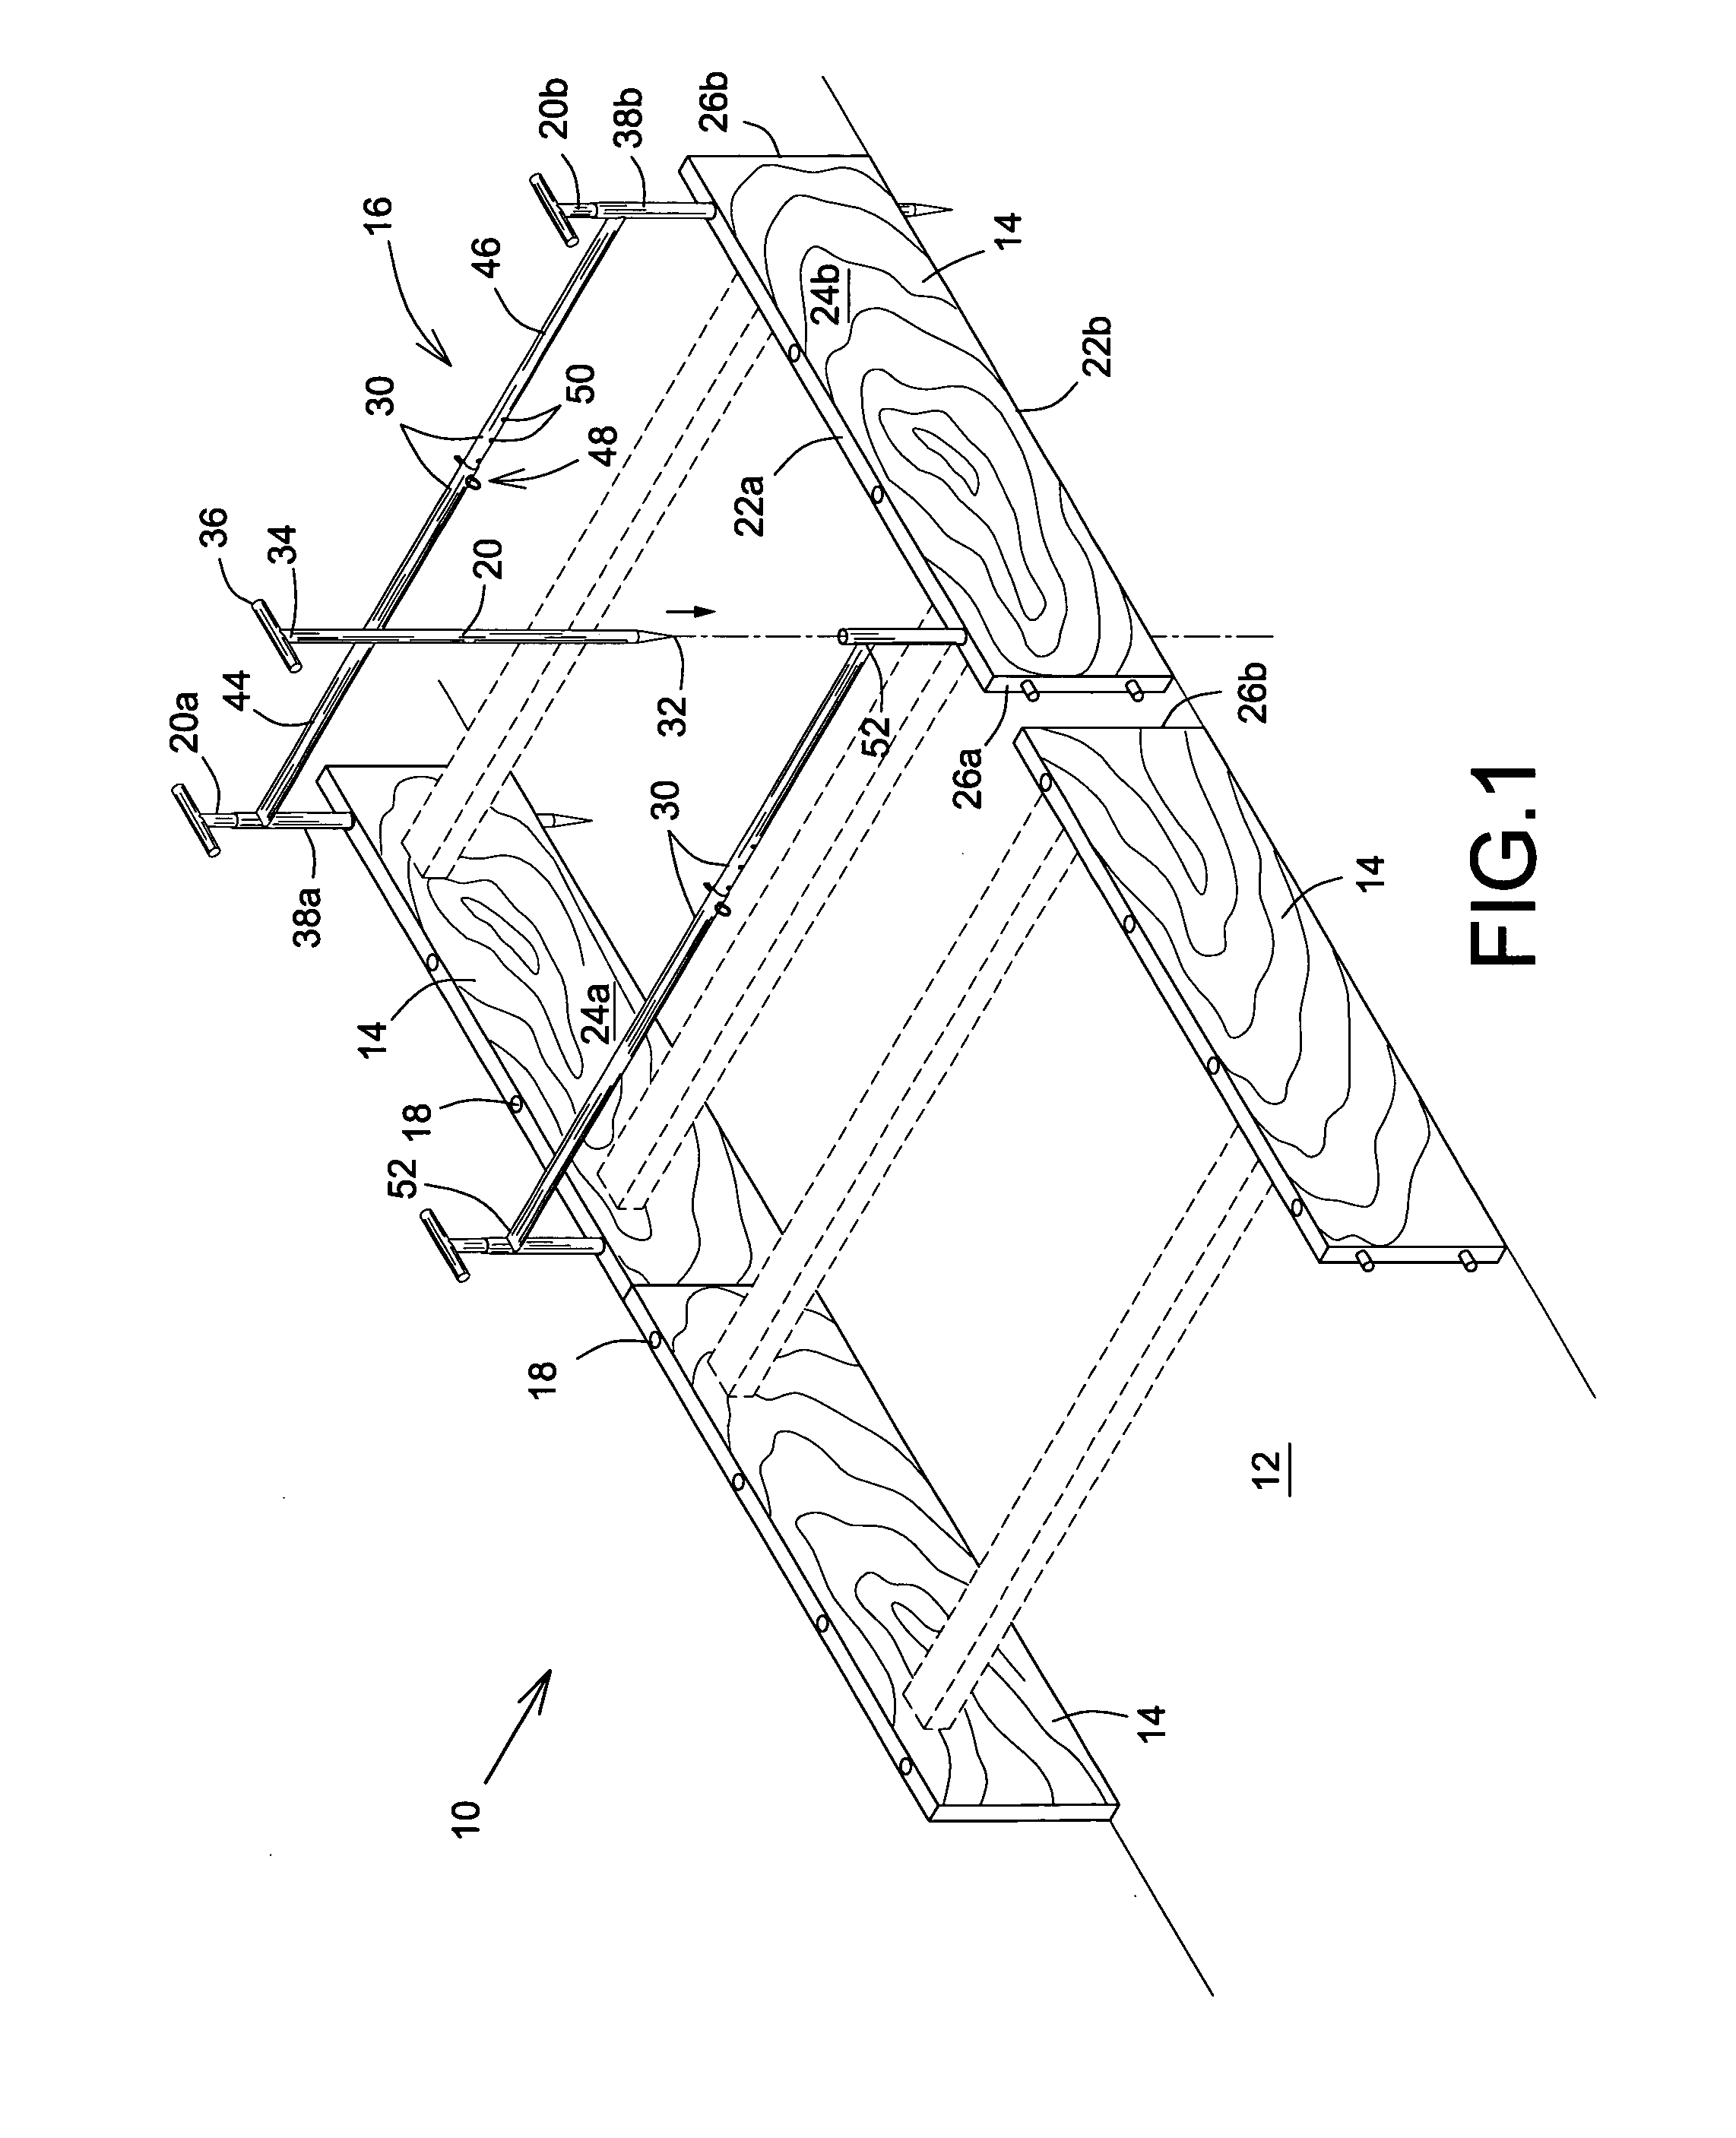 Brace, system and method for forming cementitious structures on a ground surface